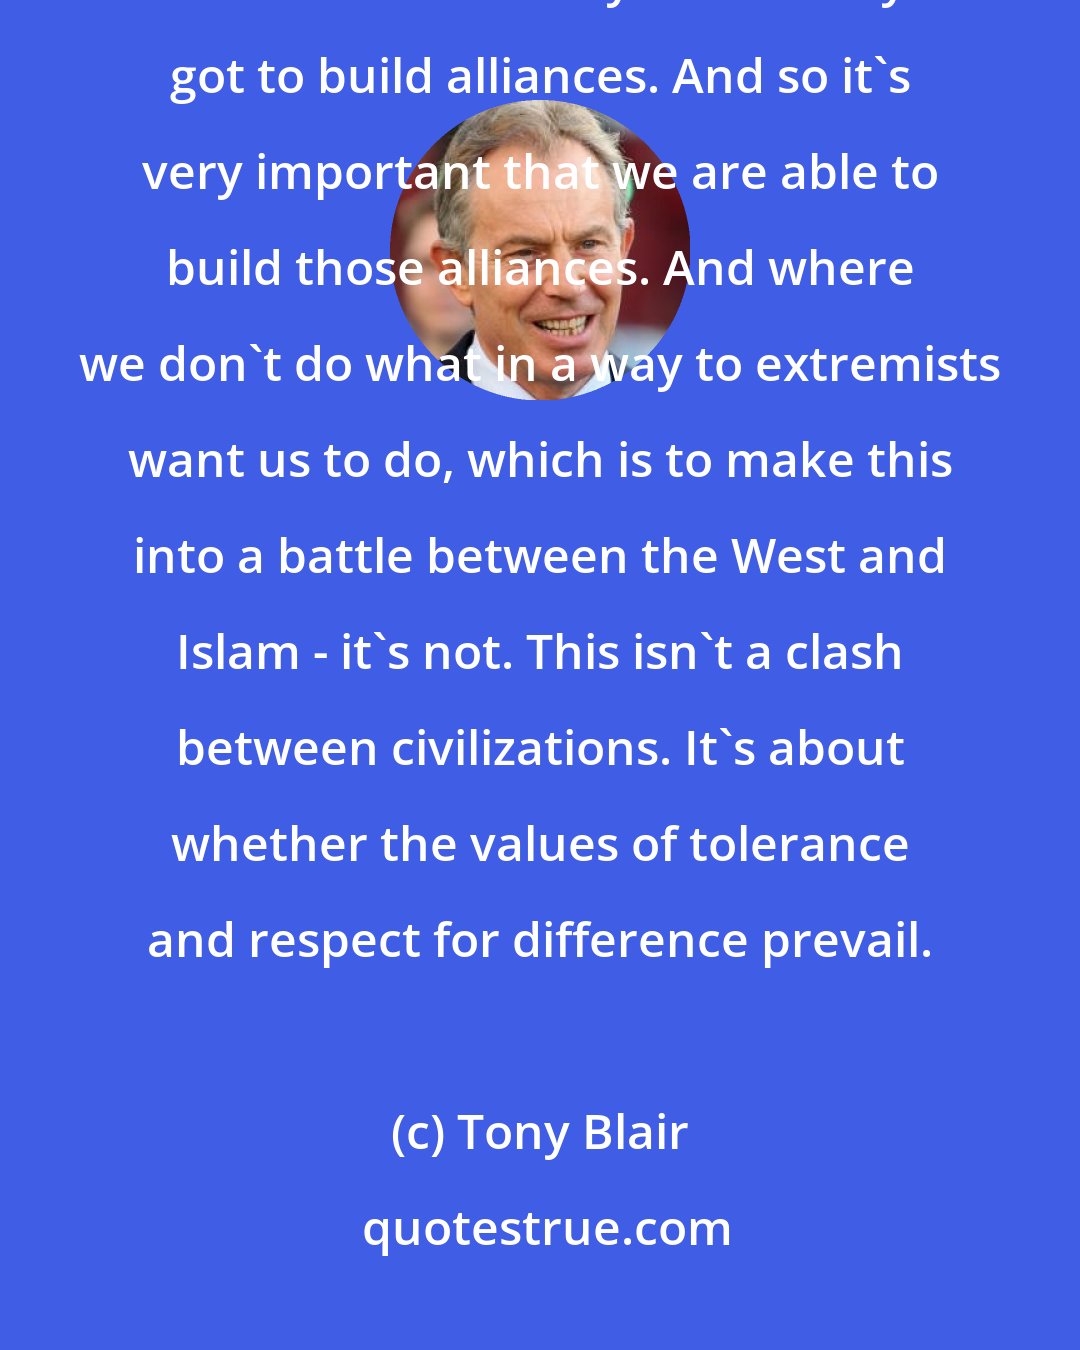 Tony Blair: Well, we definitely need a strong and clear and assertive America. That's for sure. But you've always got to build alliances. And so it's very important that we are able to build those alliances. And where we don't do what in a way to extremists want us to do, which is to make this into a battle between the West and Islam - it's not. This isn't a clash between civilizations. It's about whether the values of tolerance and respect for difference prevail.